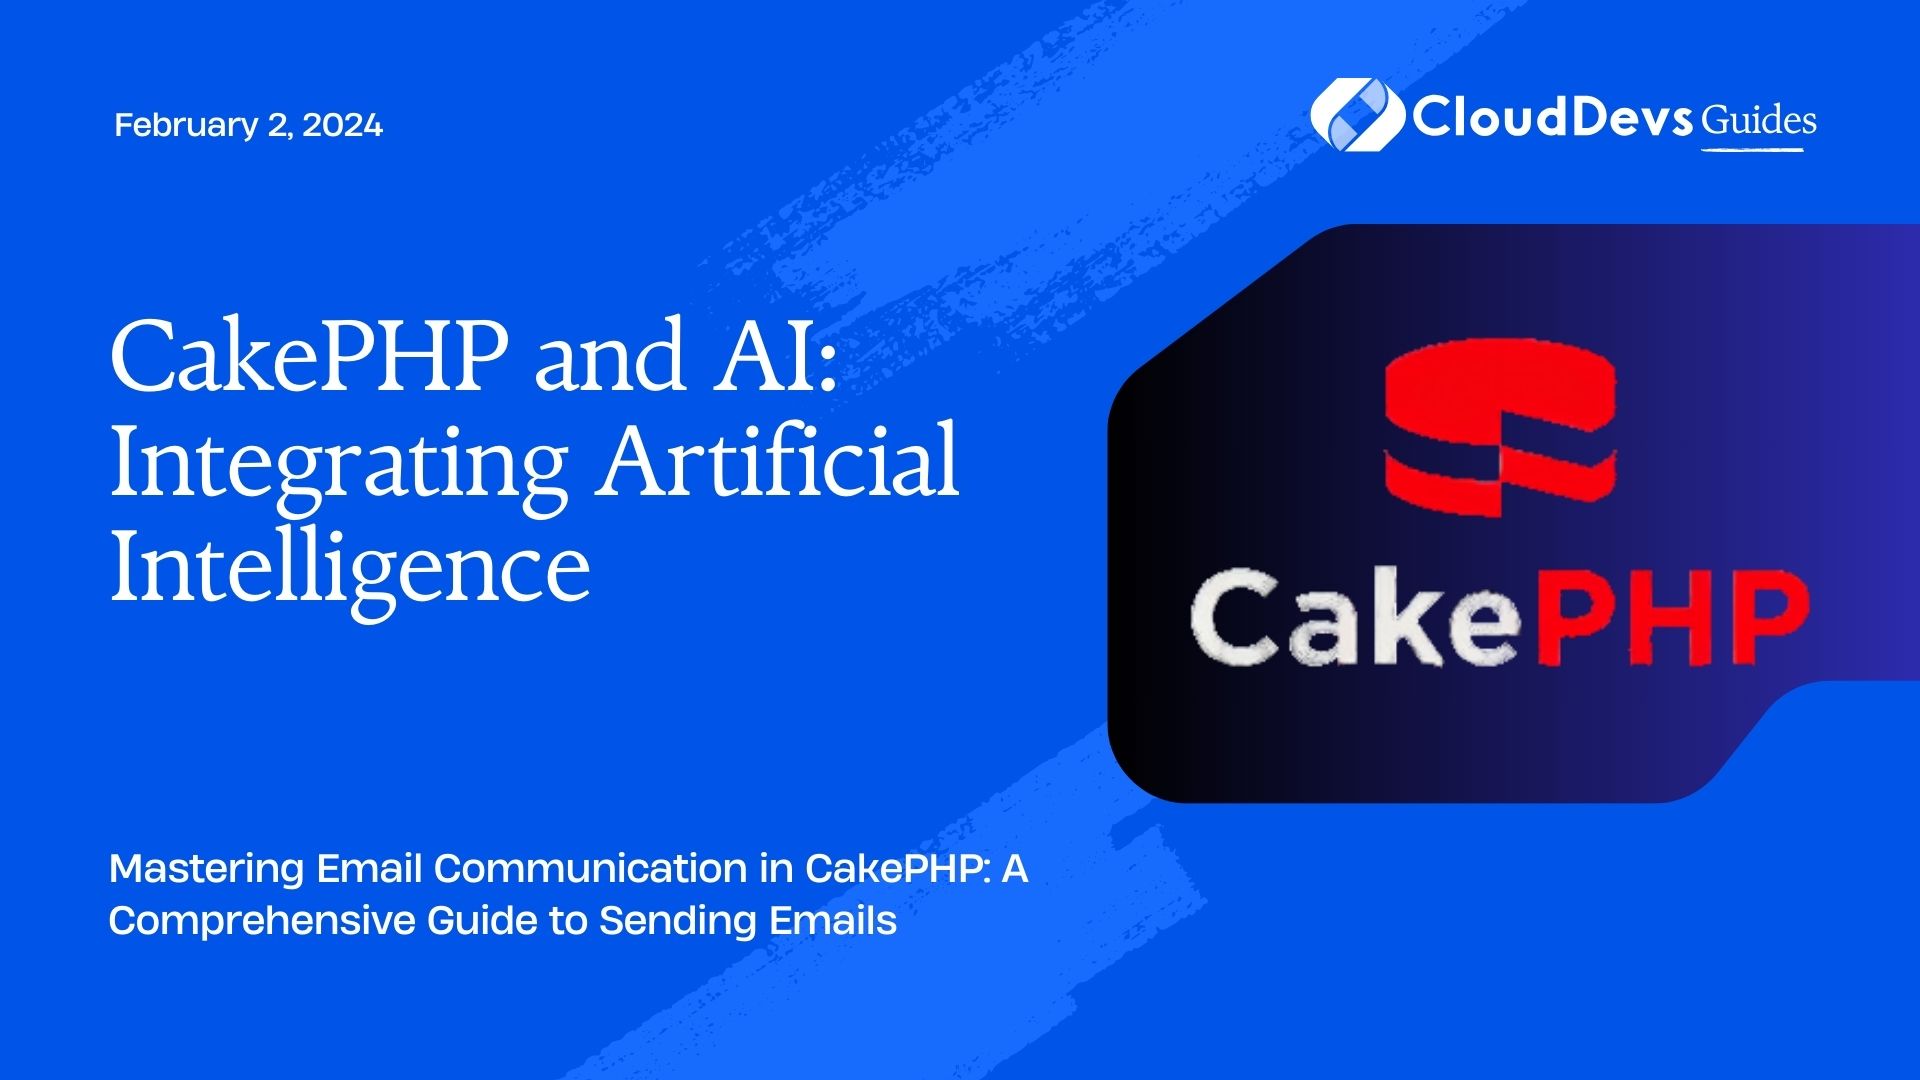 CakePHP and AI: Integrating Artificial Intelligence